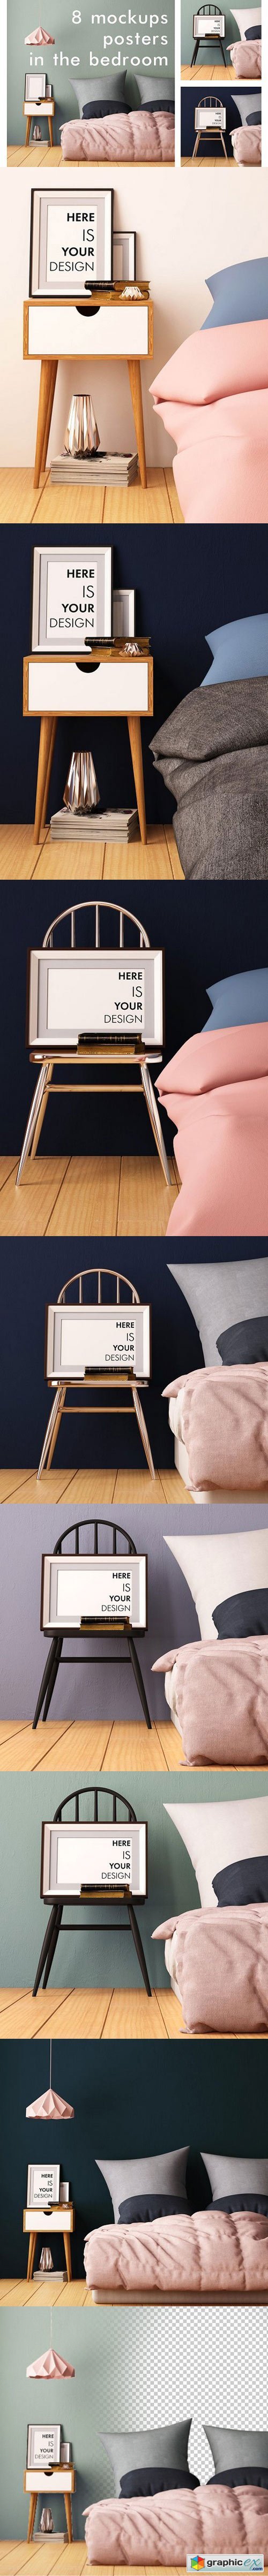 8 mockups posters in the bedroom